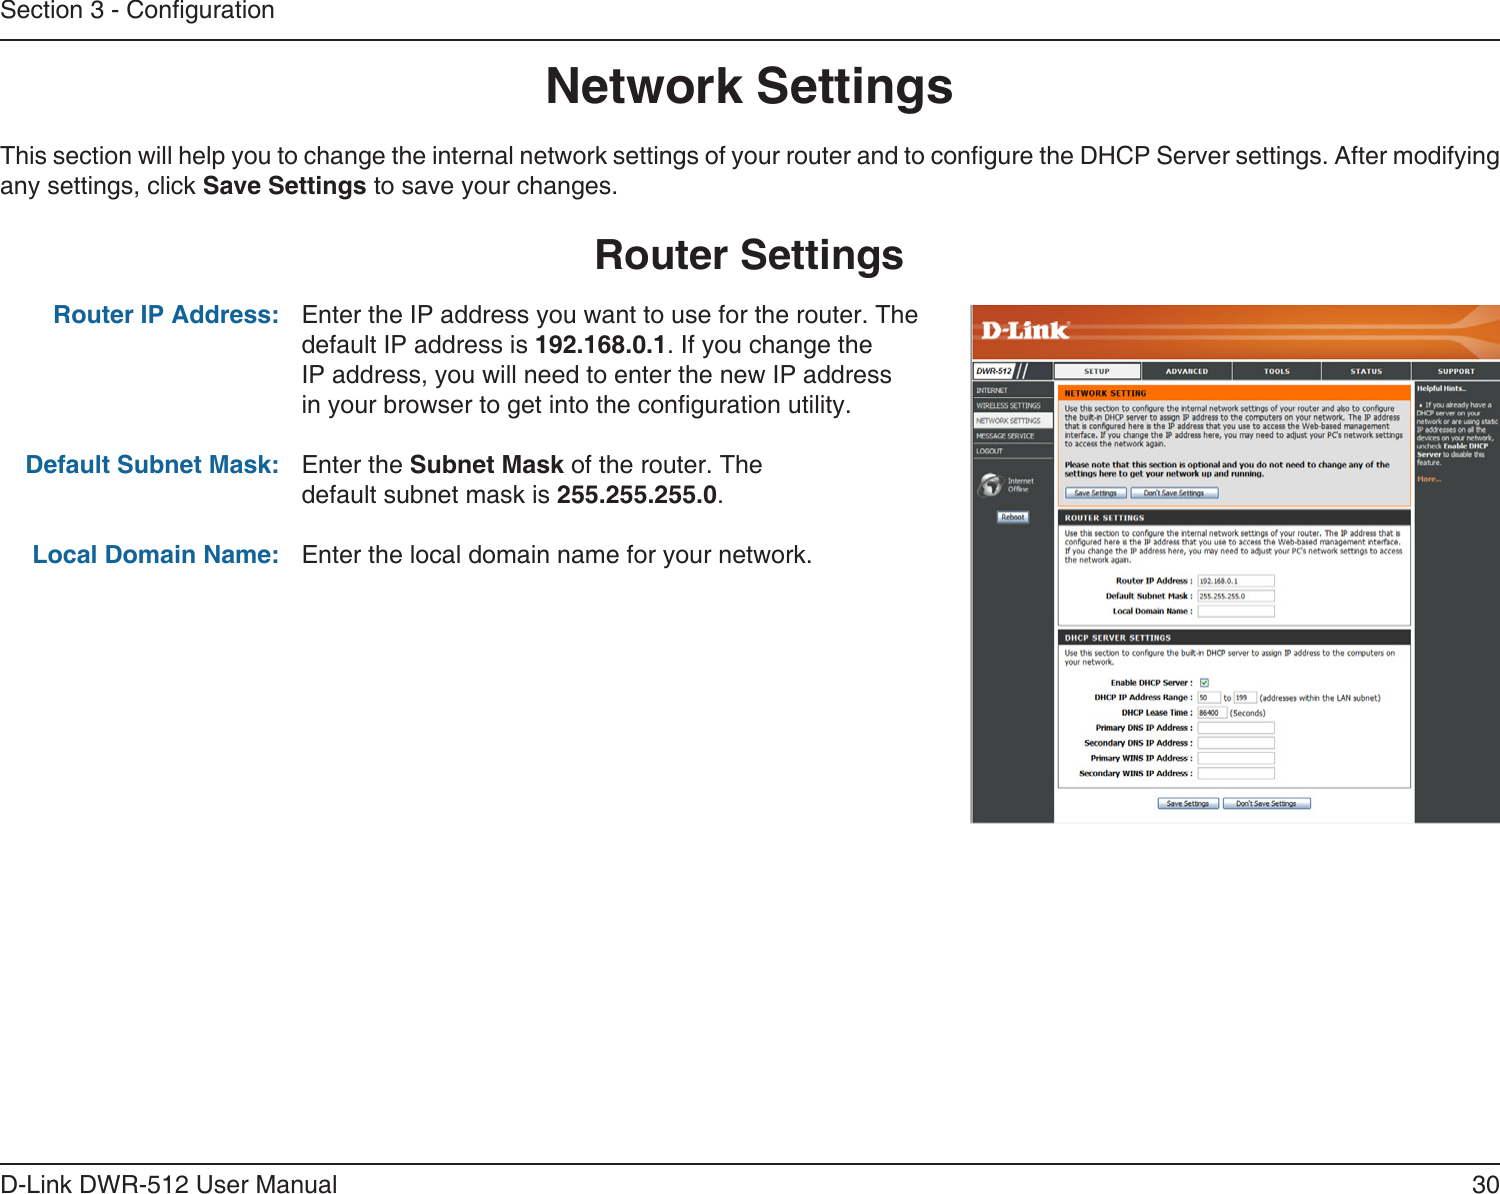 30D-Link DWR-512 User ManualSection 3 - CongurationThis section will help you to change the internal network settings of your router and to congure the DHCP Server settings. After modifying any settings, click Save Settings to save your changes.Network SettingsEnter the IP address you want to use for the router. The default IP address is 192.168.0.1. If you change the IP address, you will need to enter the new IP address in your browser to get into the conguration utility.Enter the Subnet Mask of the router. The default subnet mask is 255.255.255.0.Enter the local domain name for your network.Router IP Address:Default Subnet Mask: Local Domain Name: Router Settings